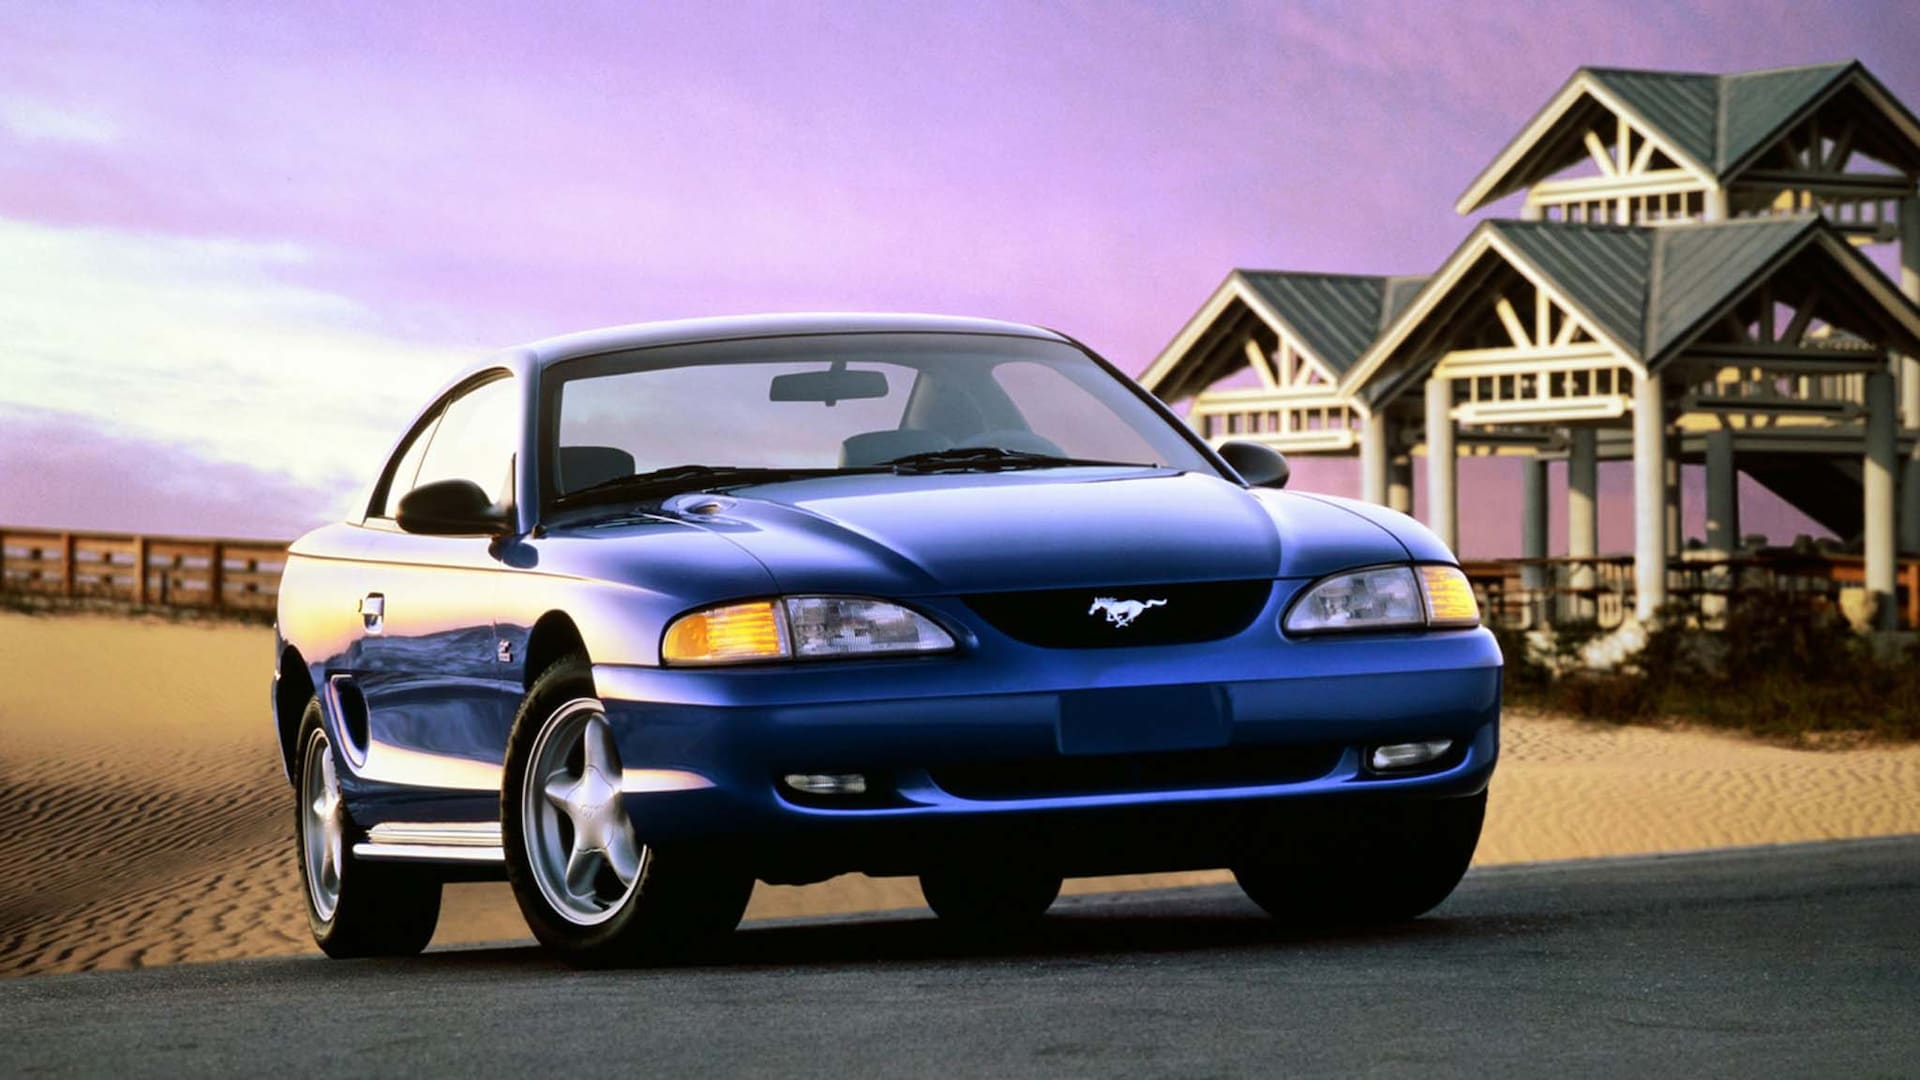 What Is an SN95 Mustang?